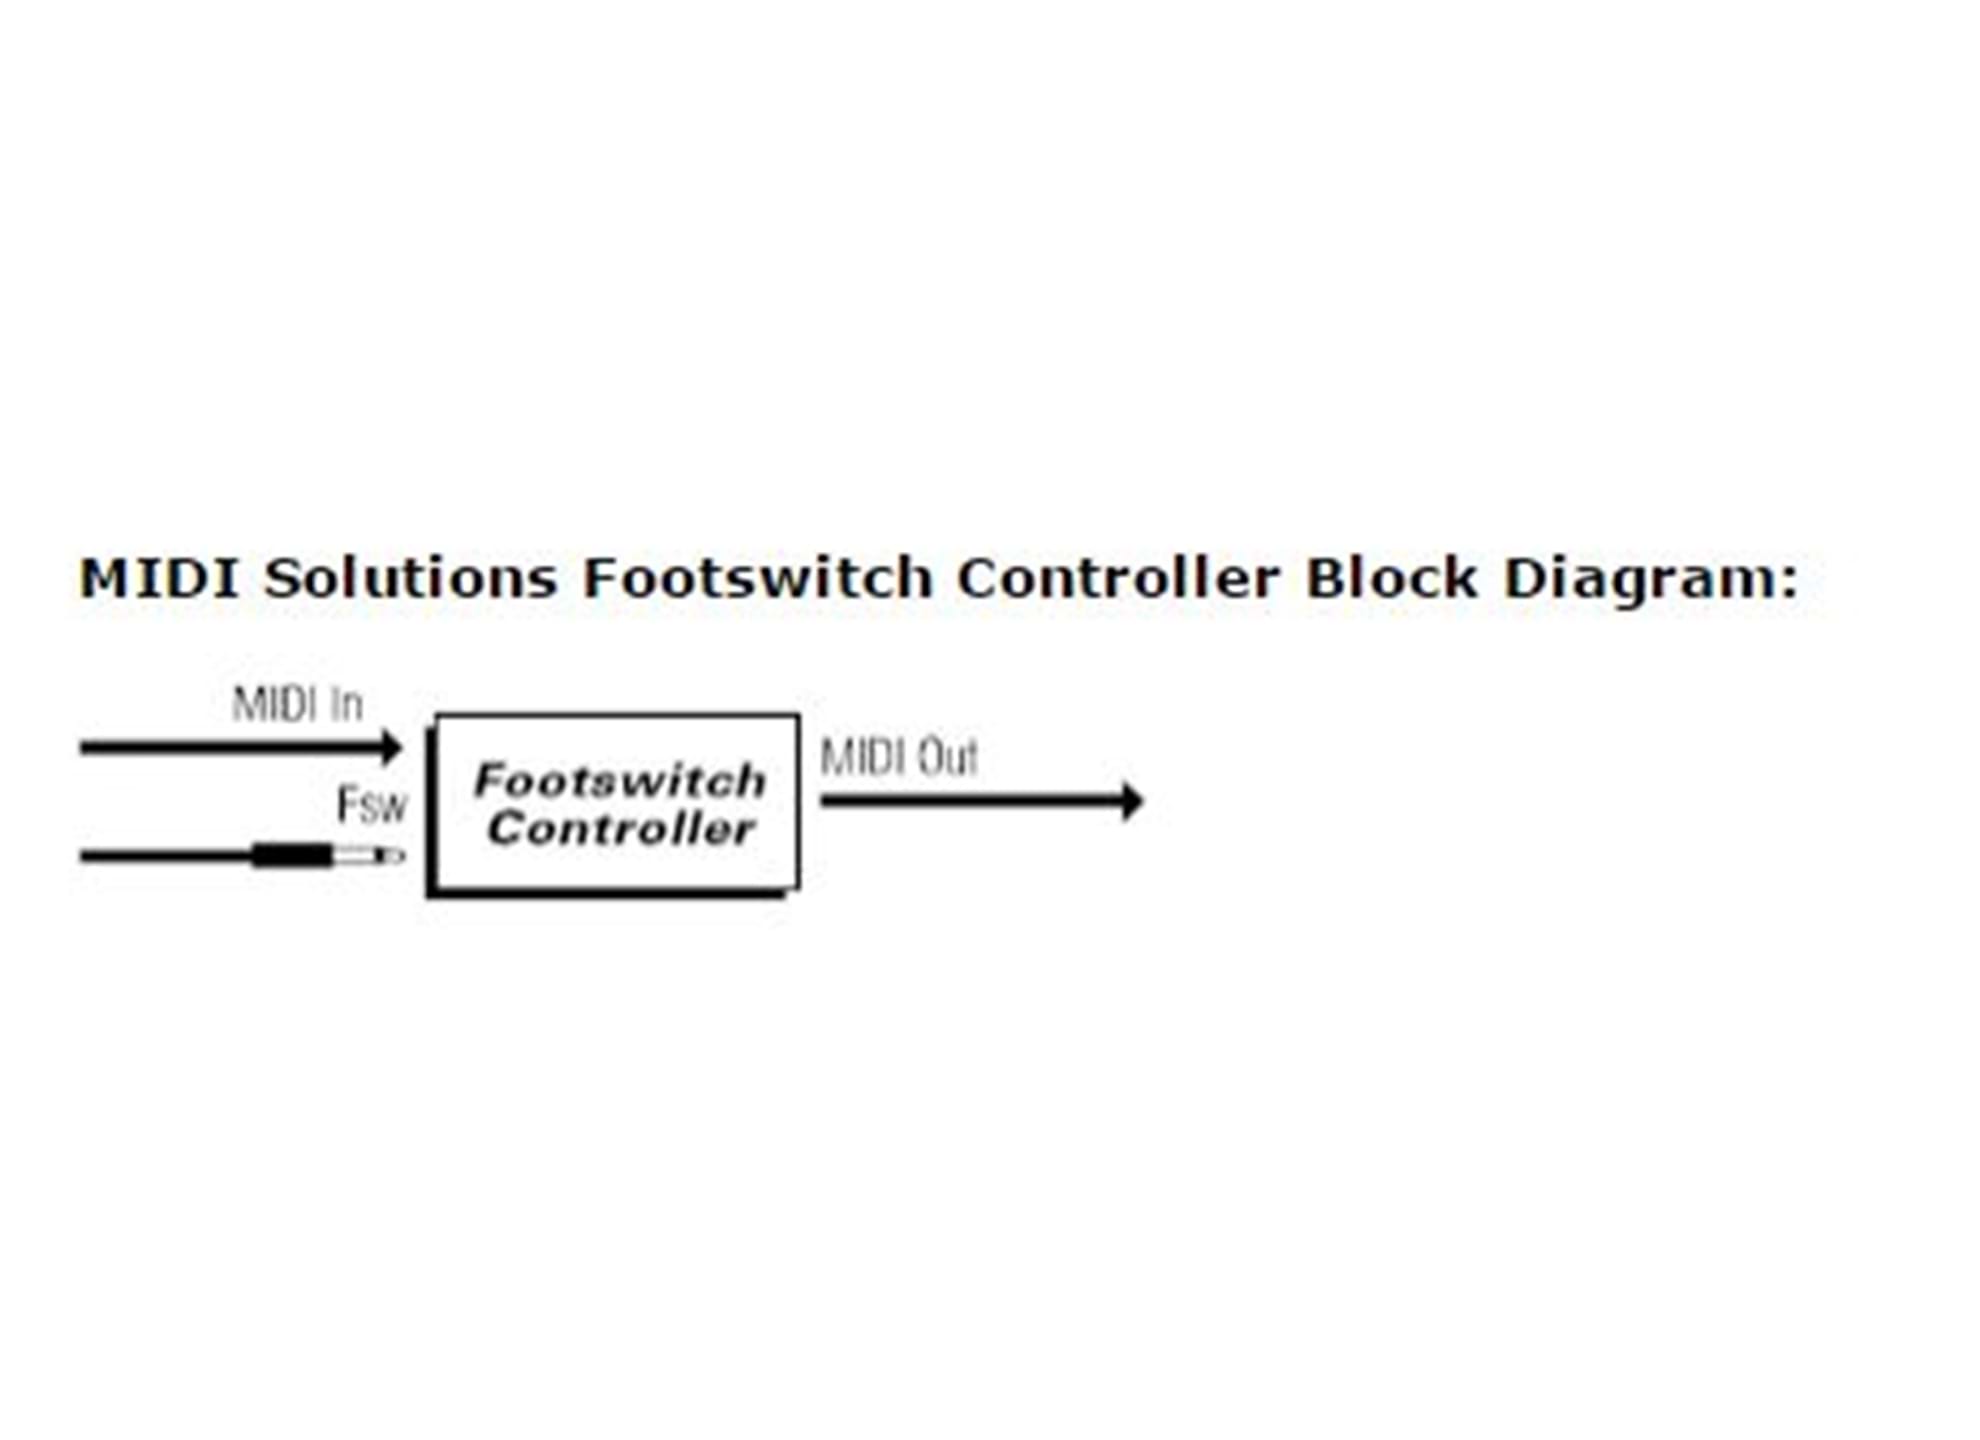 Footswitch Controller